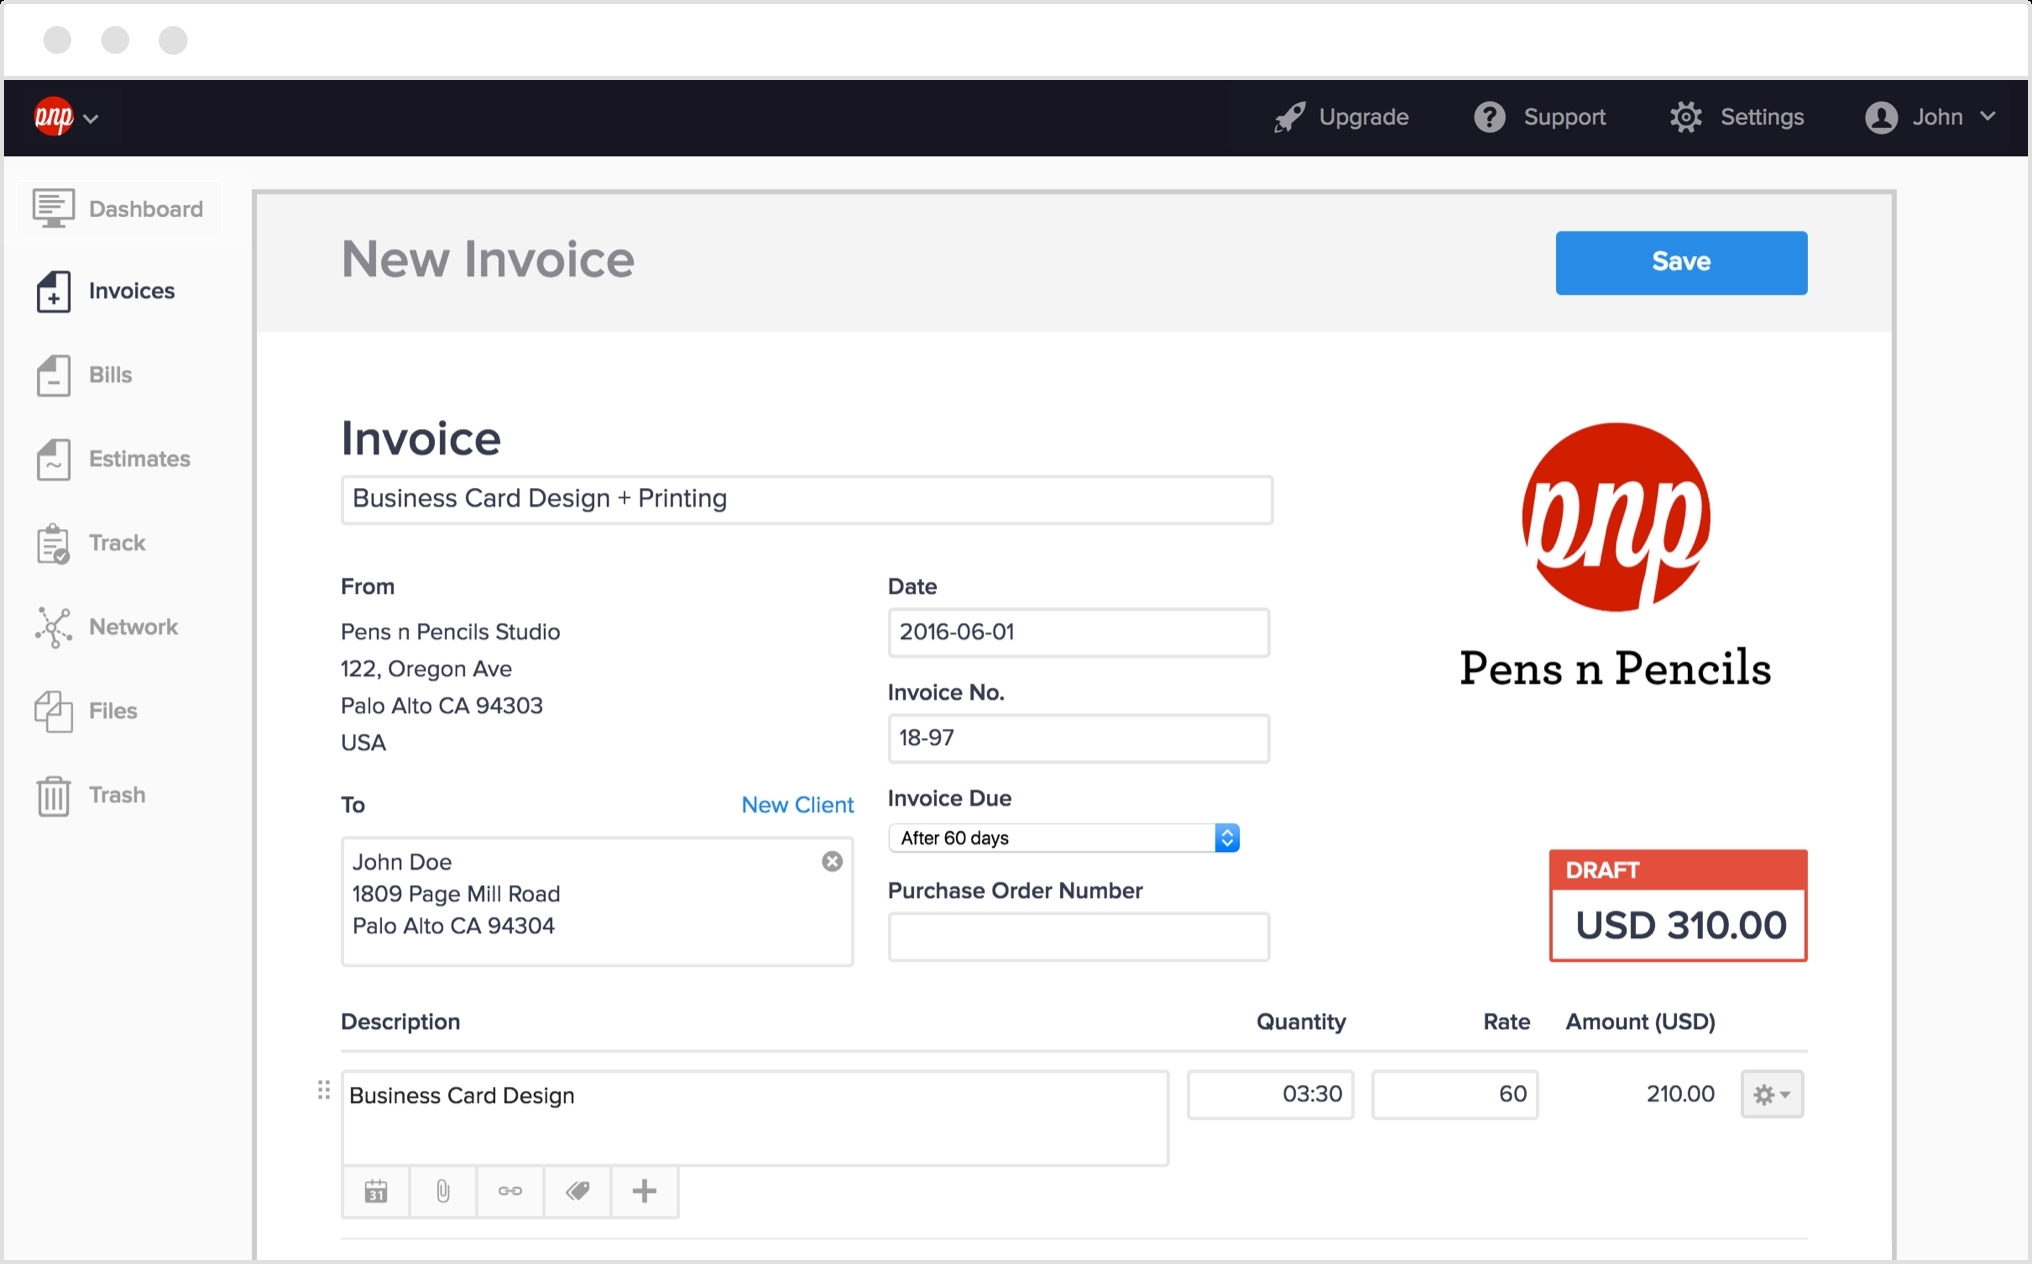 paypal invoicer